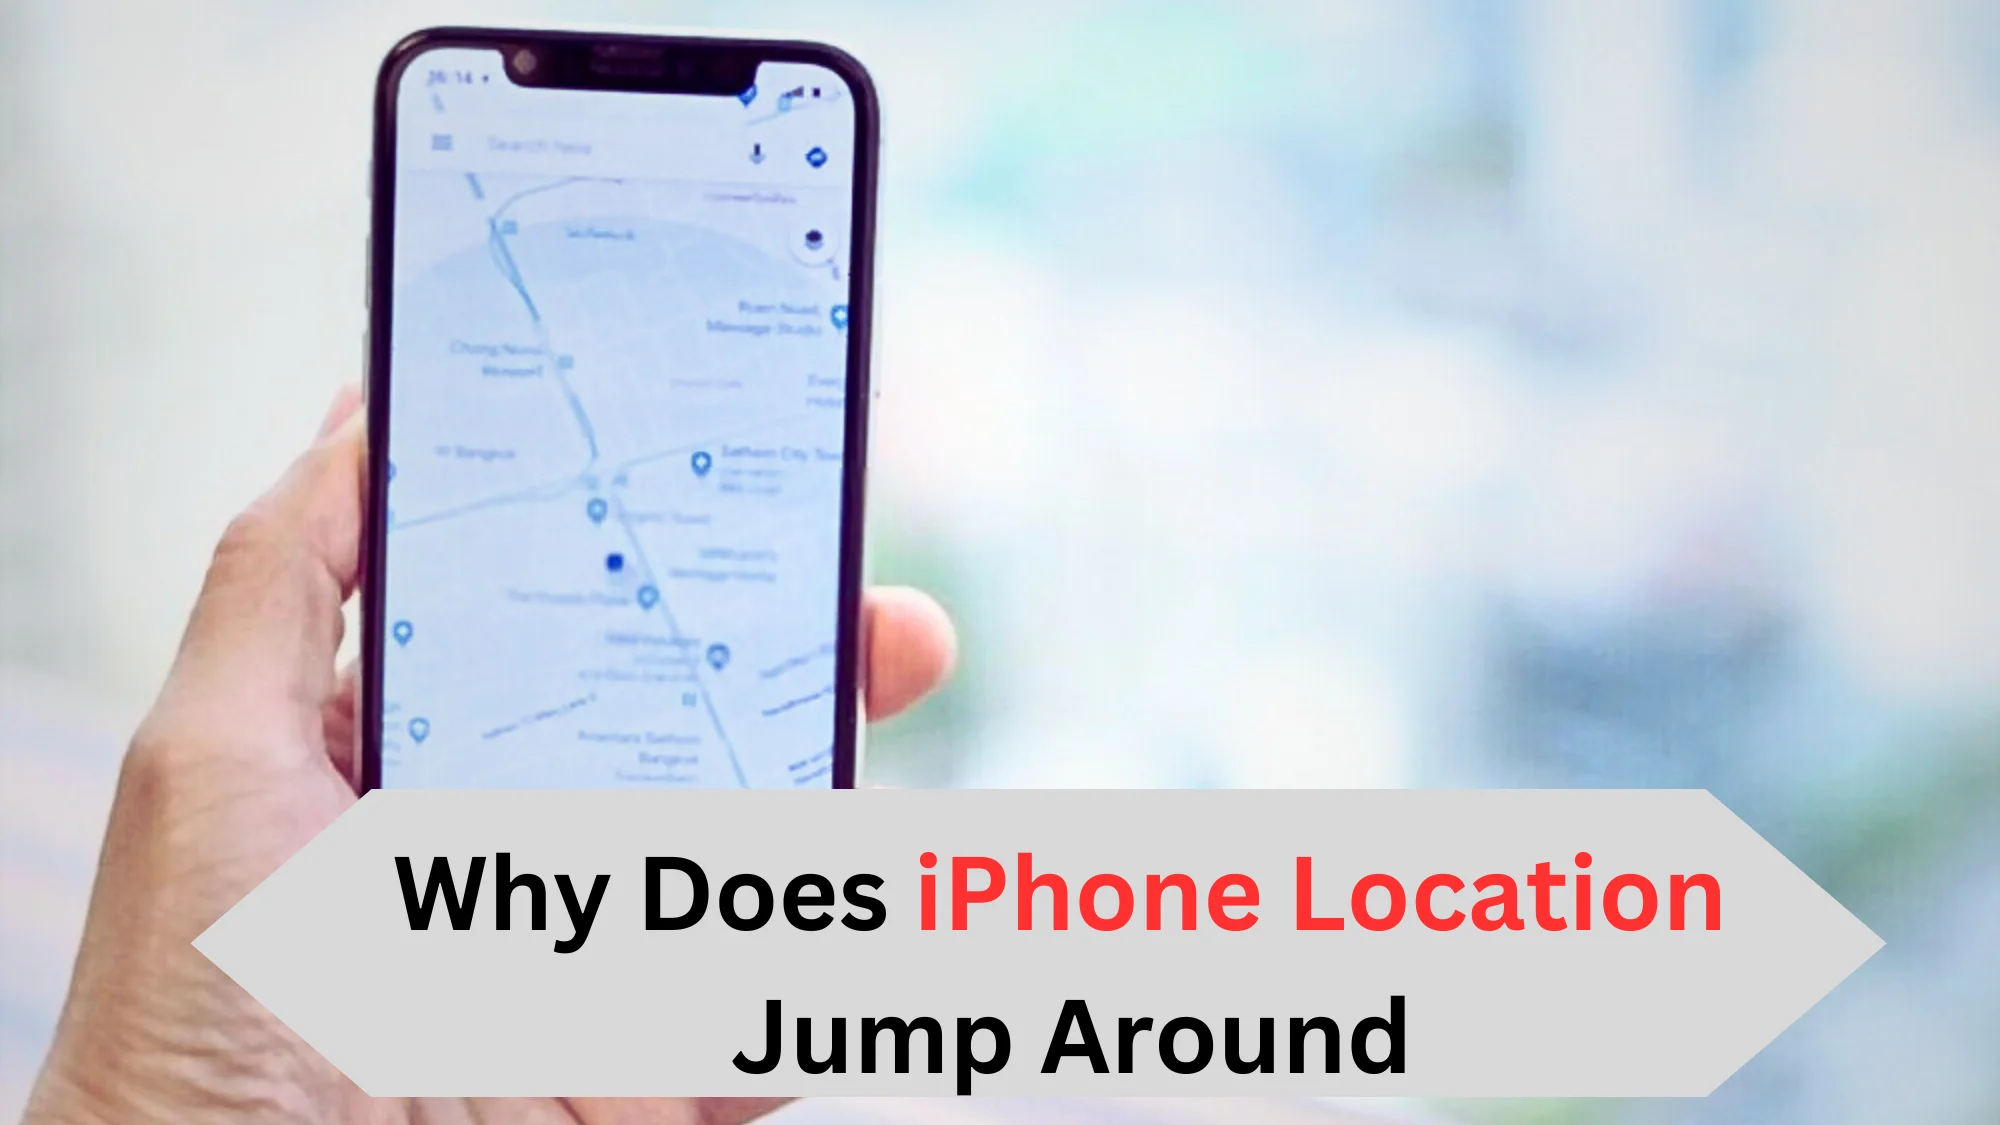 Why does iPhone Location Jump Around